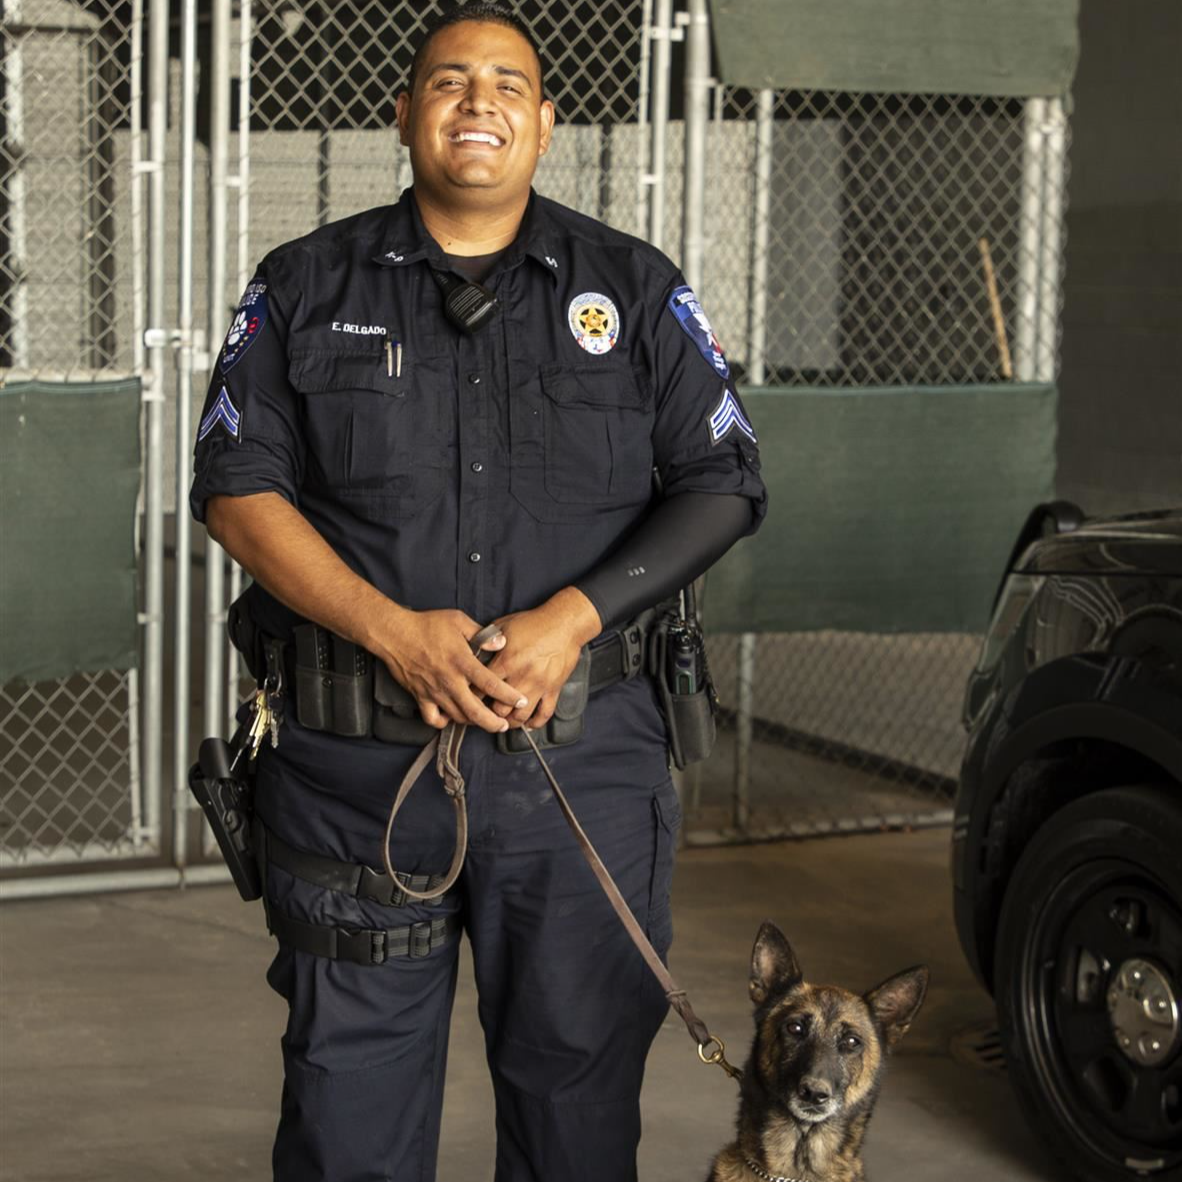 Officer Edward and his dog